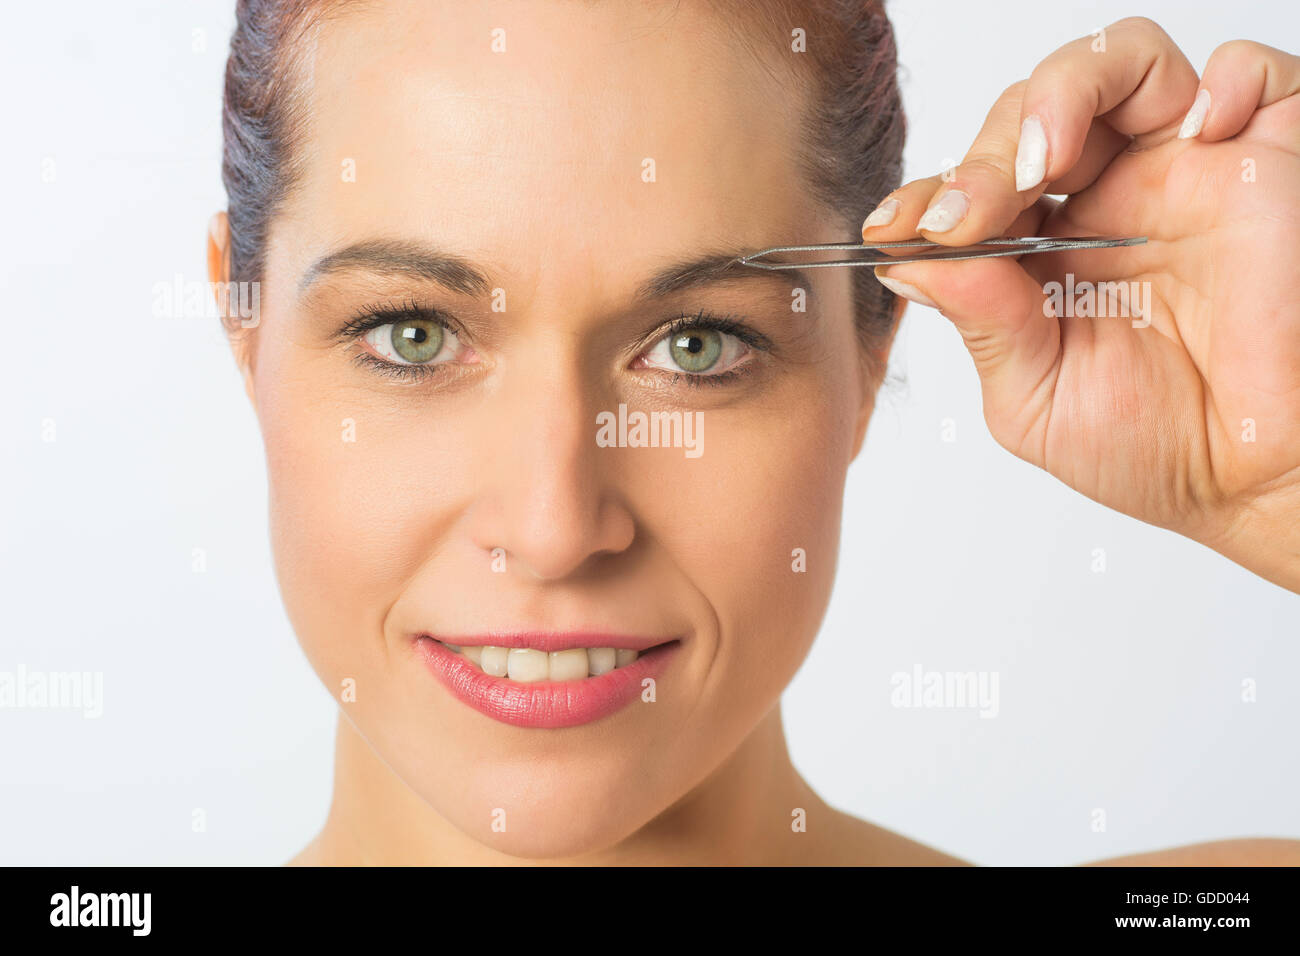 Close up of a woman plucking eyebrows with tweezers Stock Photo